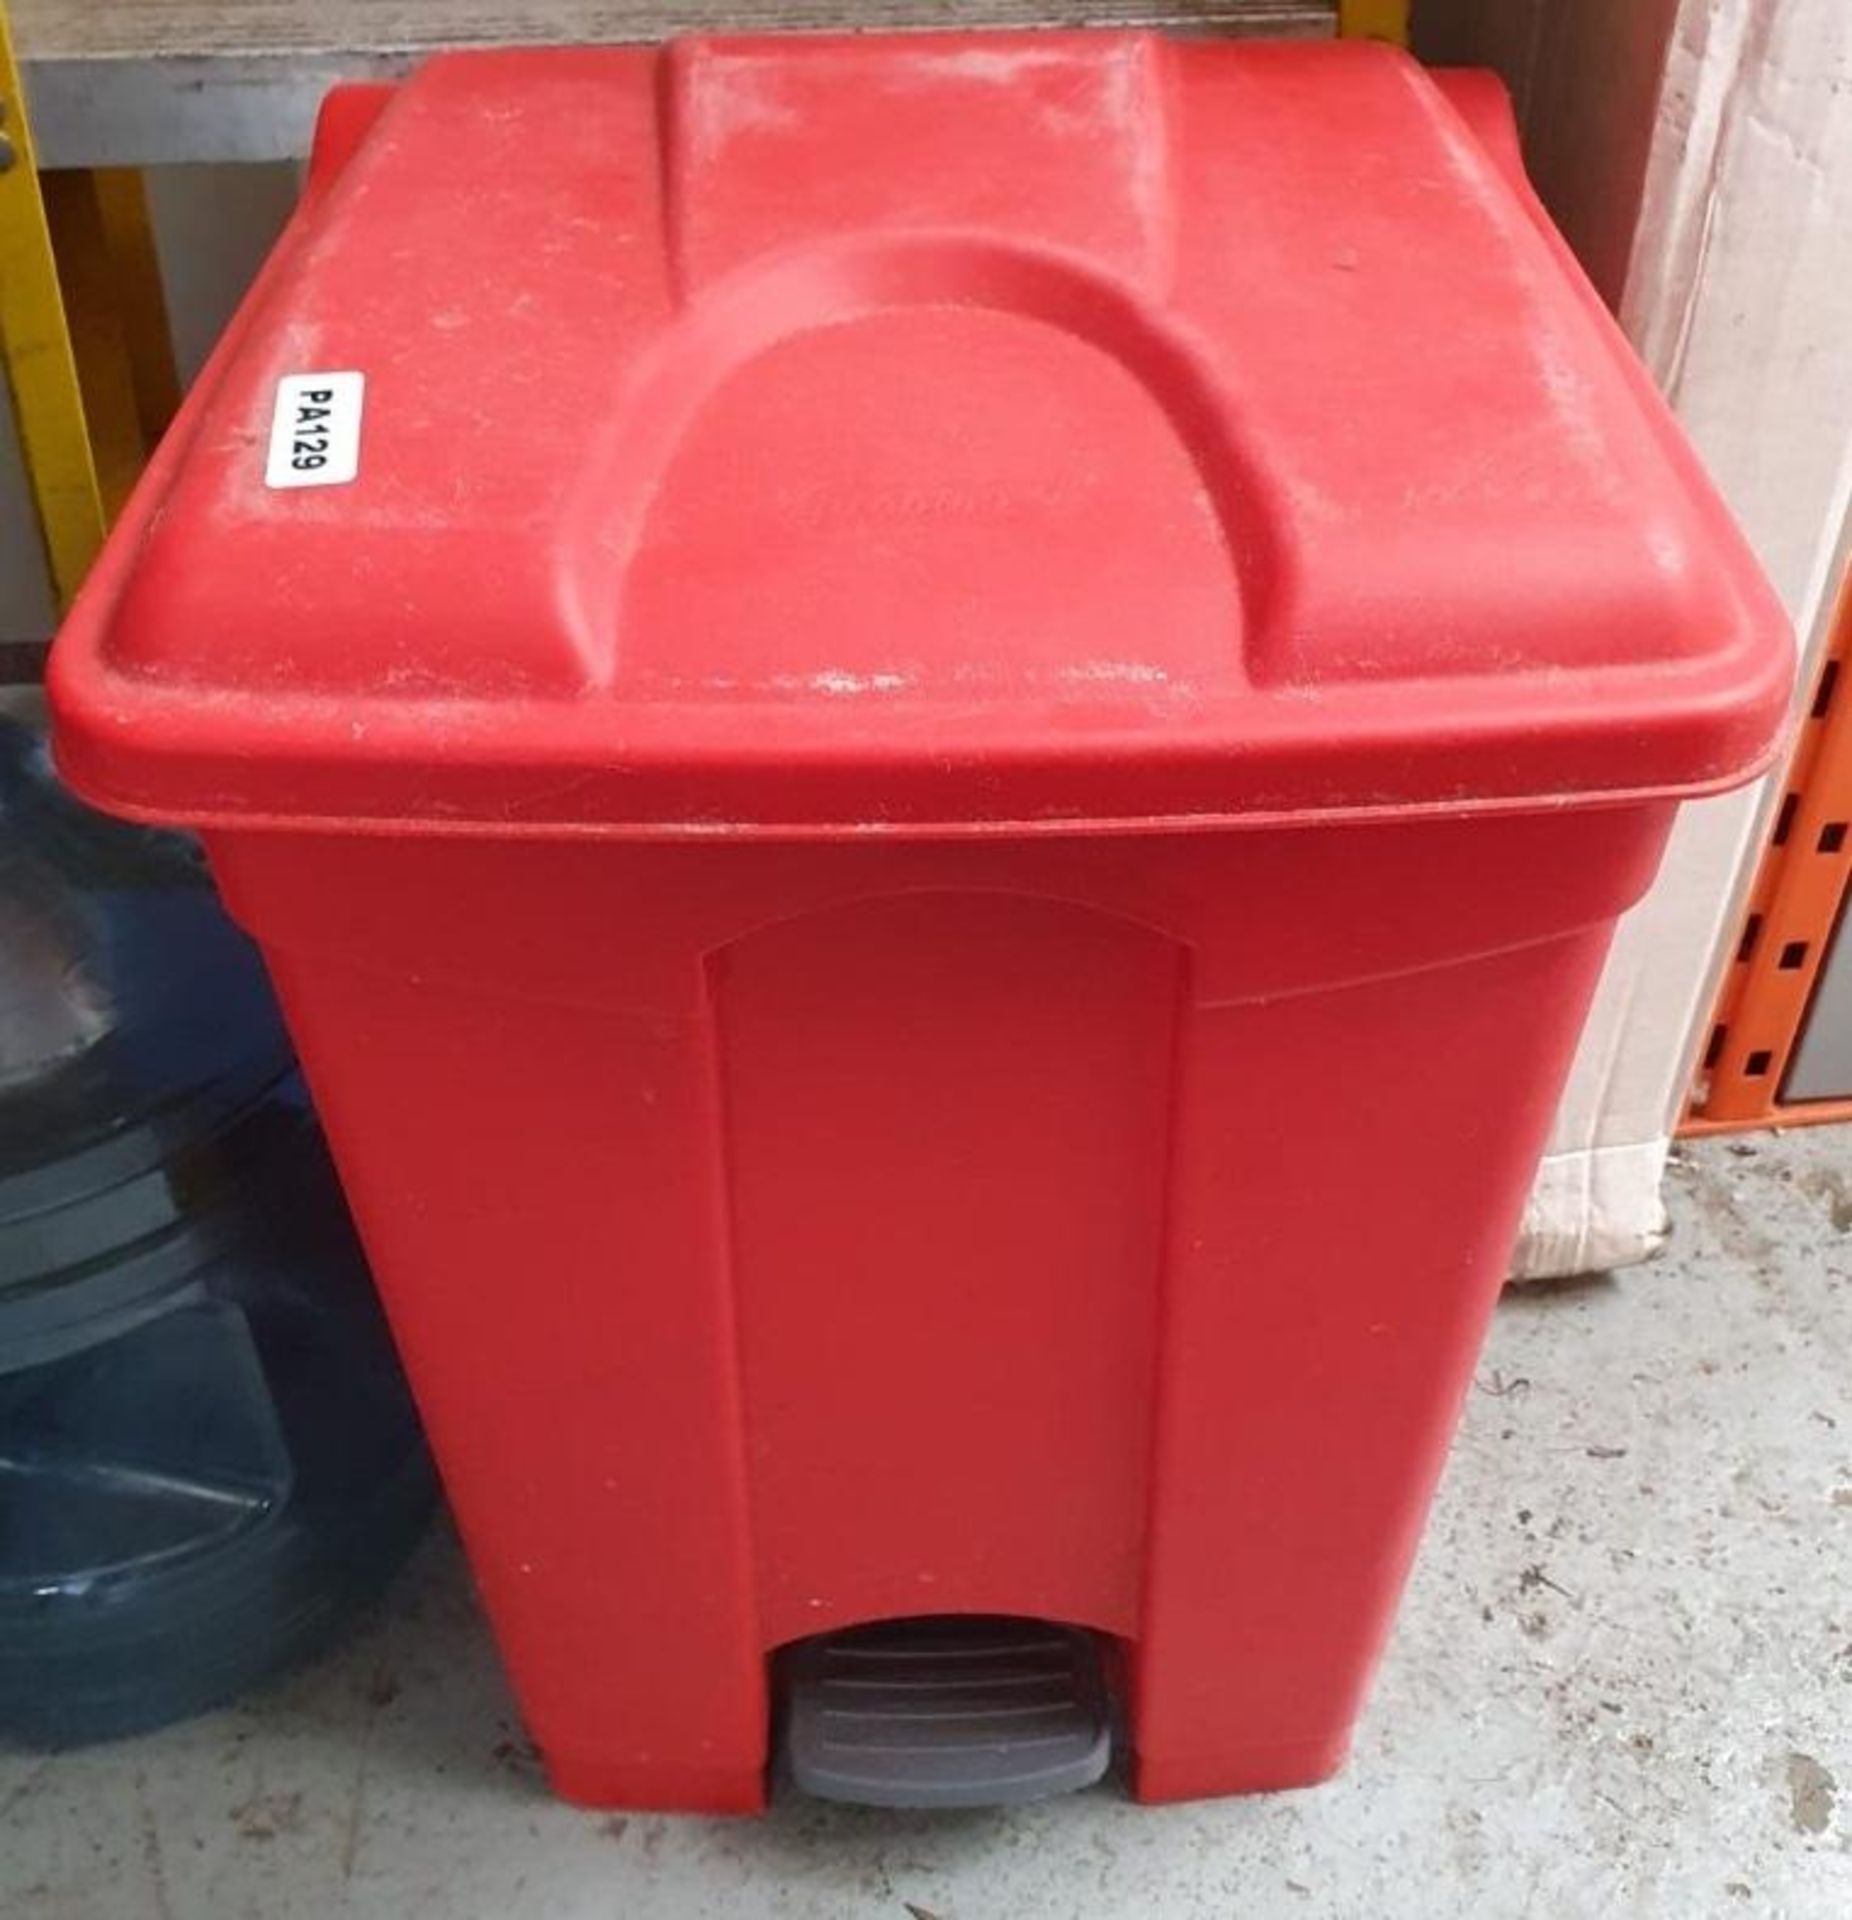 1 x Red Waste Bin - Ref PA129 - CL463 - £1 Start, No Reserve - Ref: WH1 - CL011 - Location: Altrinch